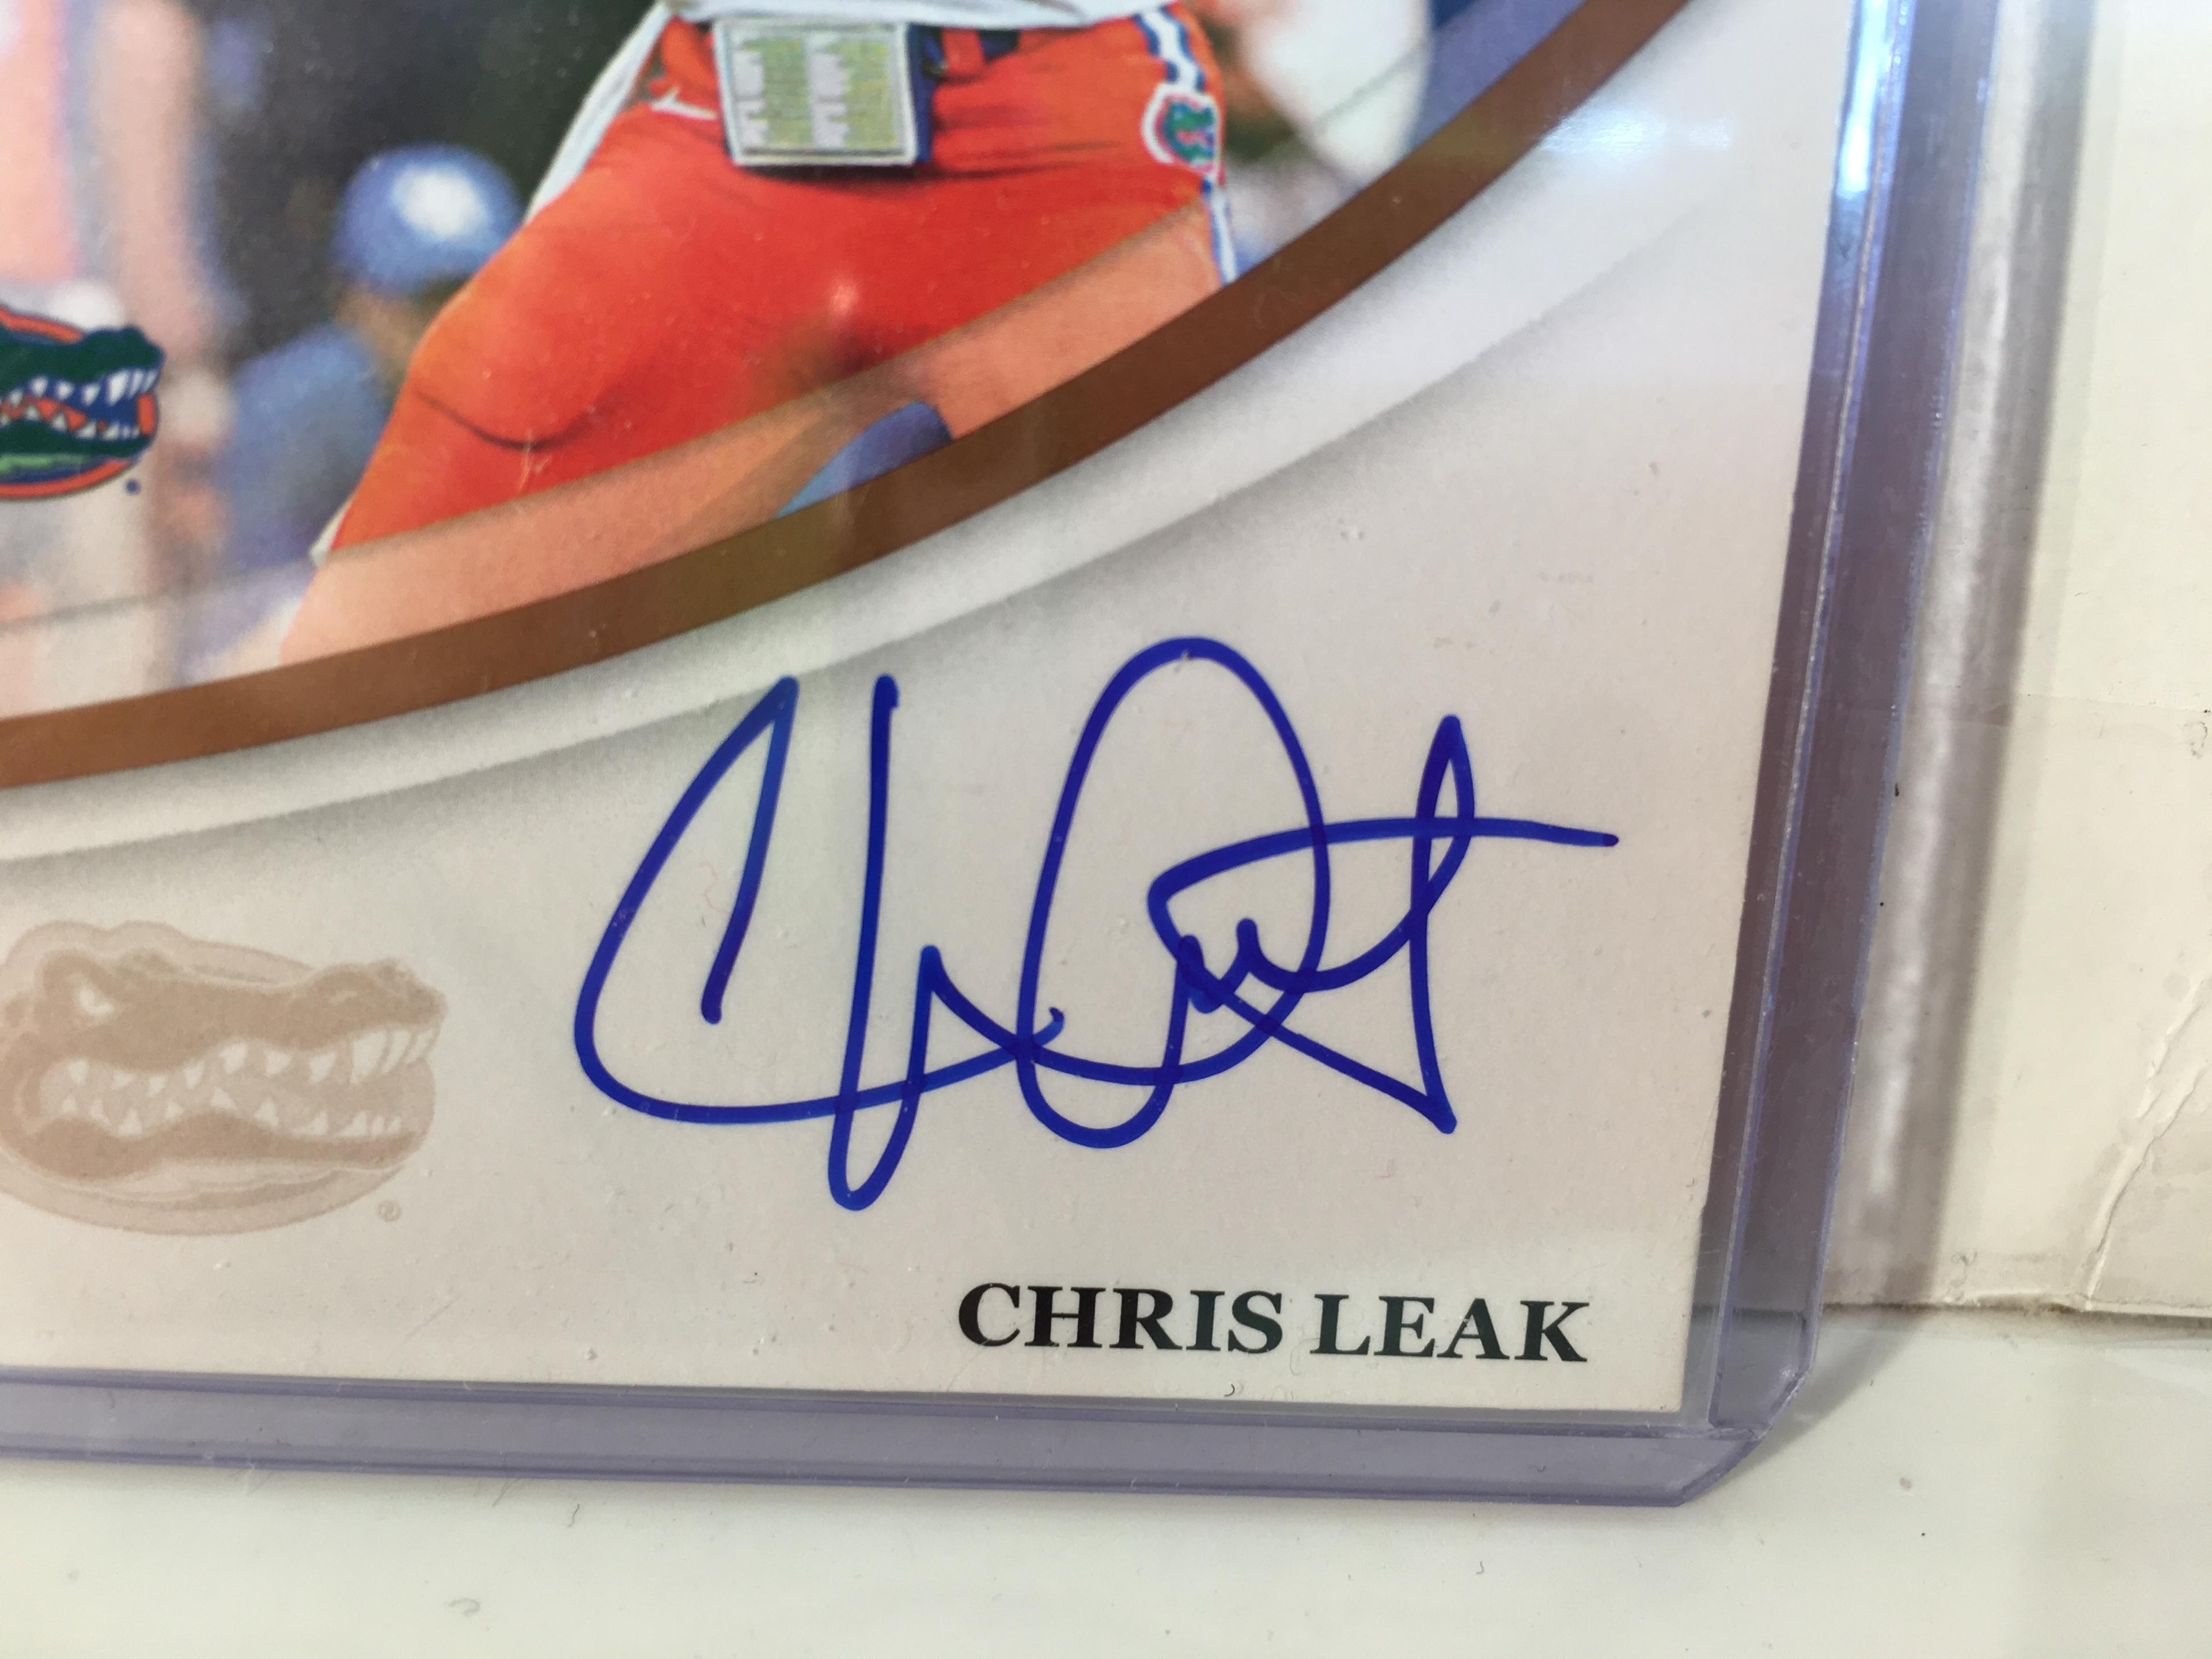 Collector 2007 Press Pass NFL Football Sport Card Autographed by Chris Leak Football Trading Card